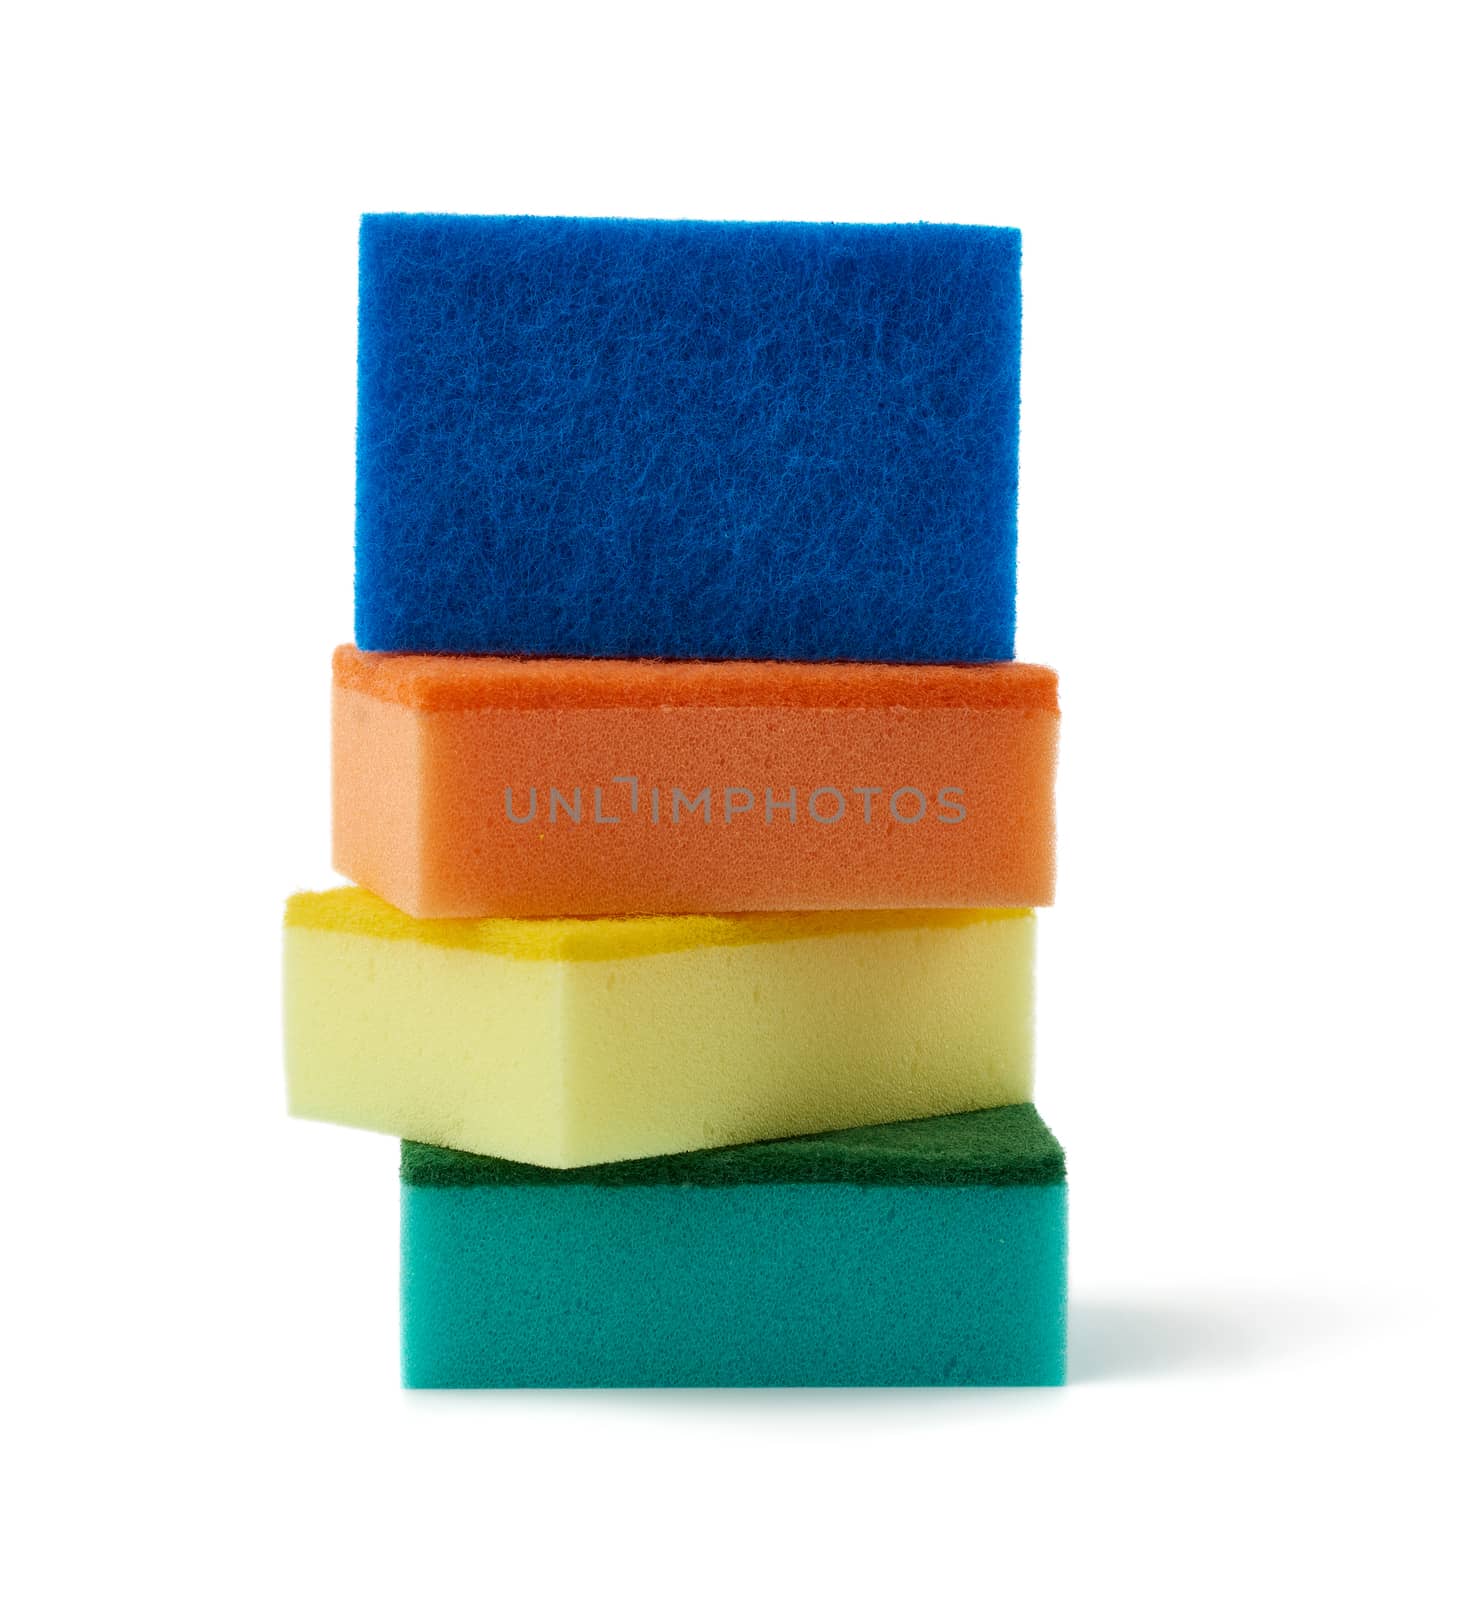 stack of new multi-colored kitchen sponges for washing dishes by ndanko